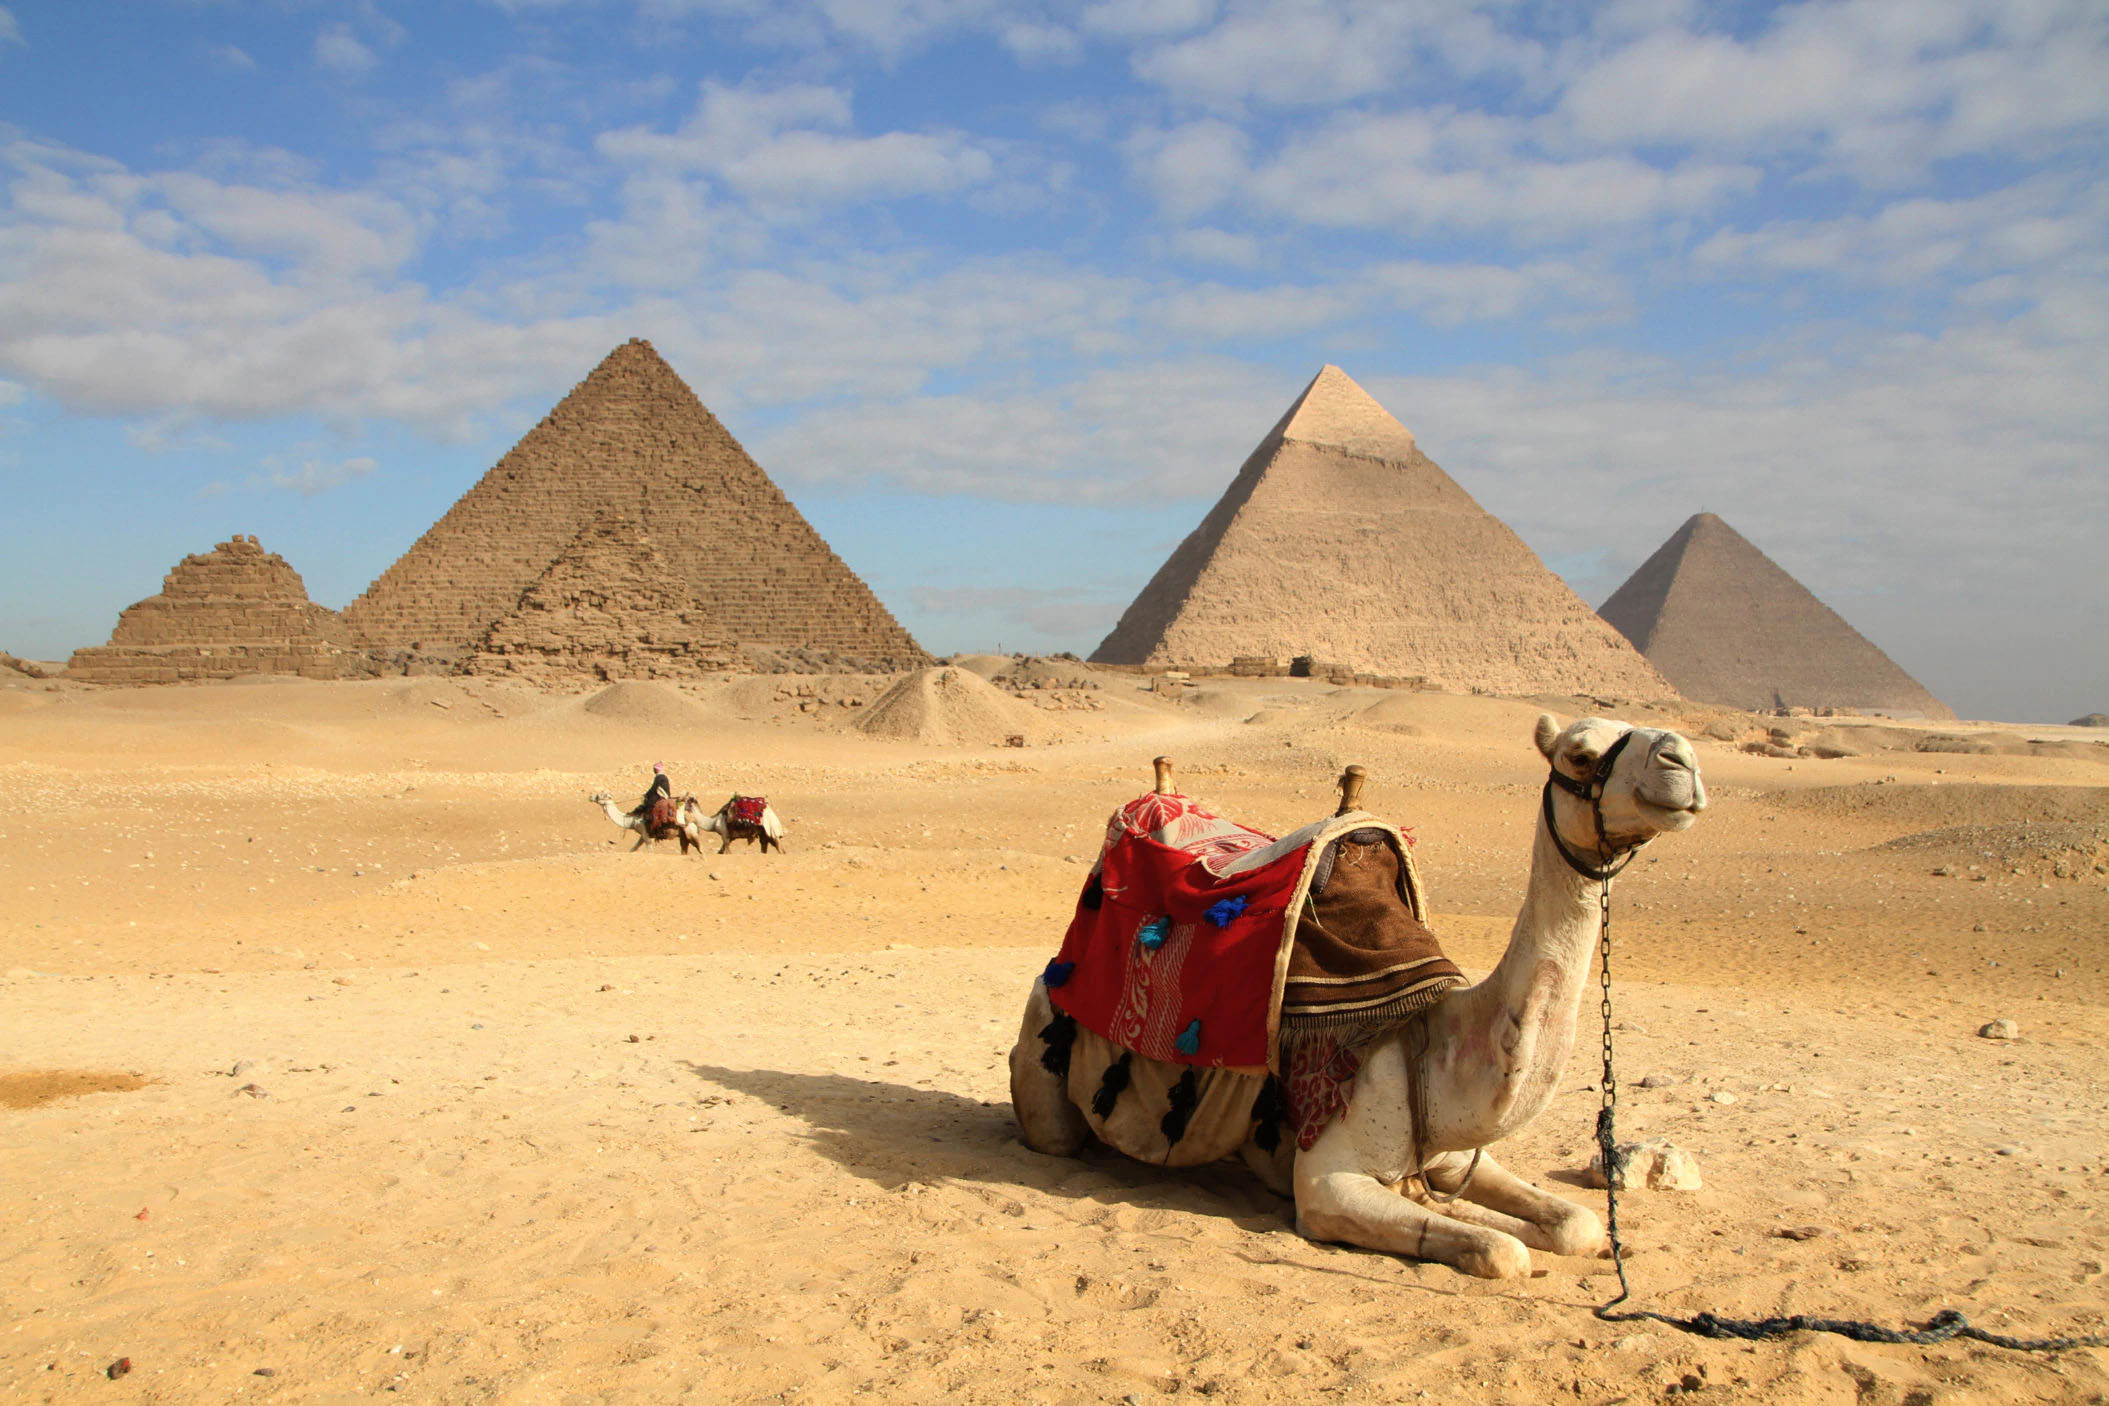 10 interesting facts about Egypt